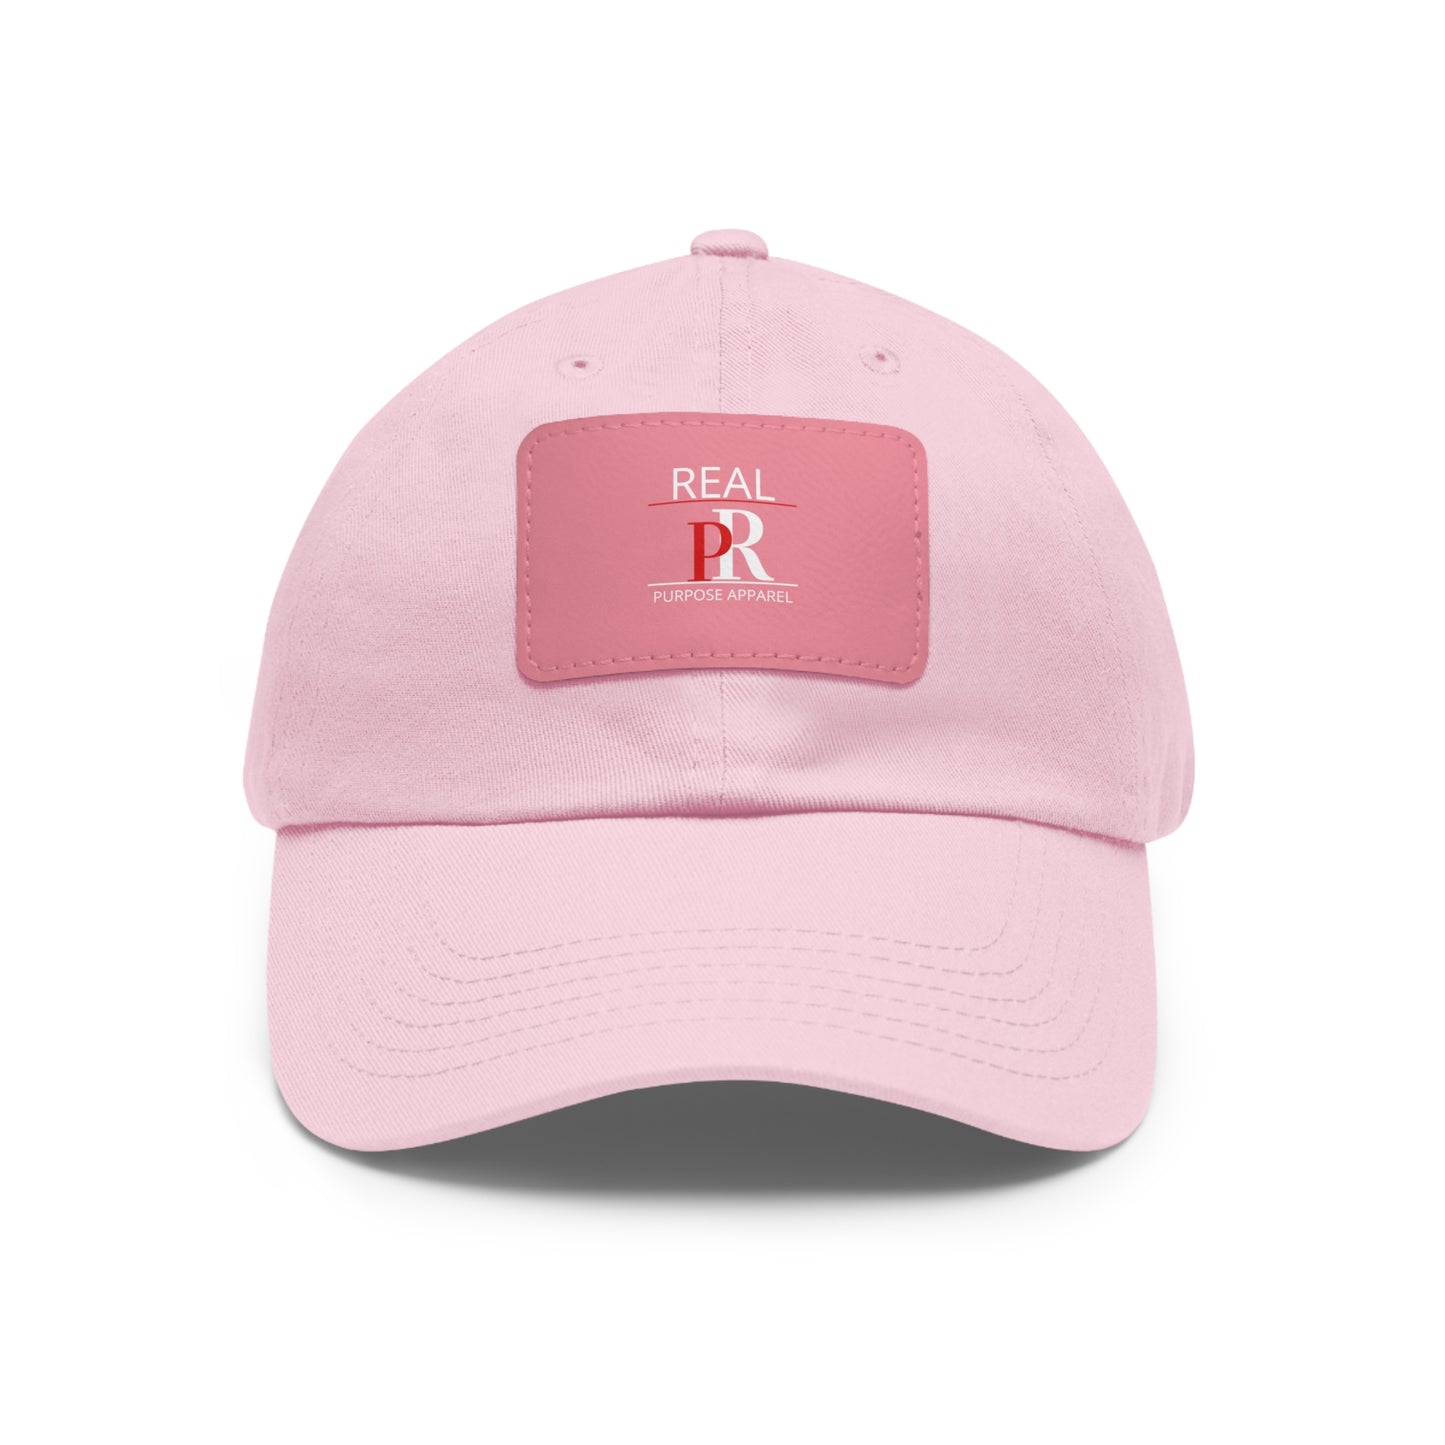 Purpose Inspired Hat with Leather Rectangle Patch